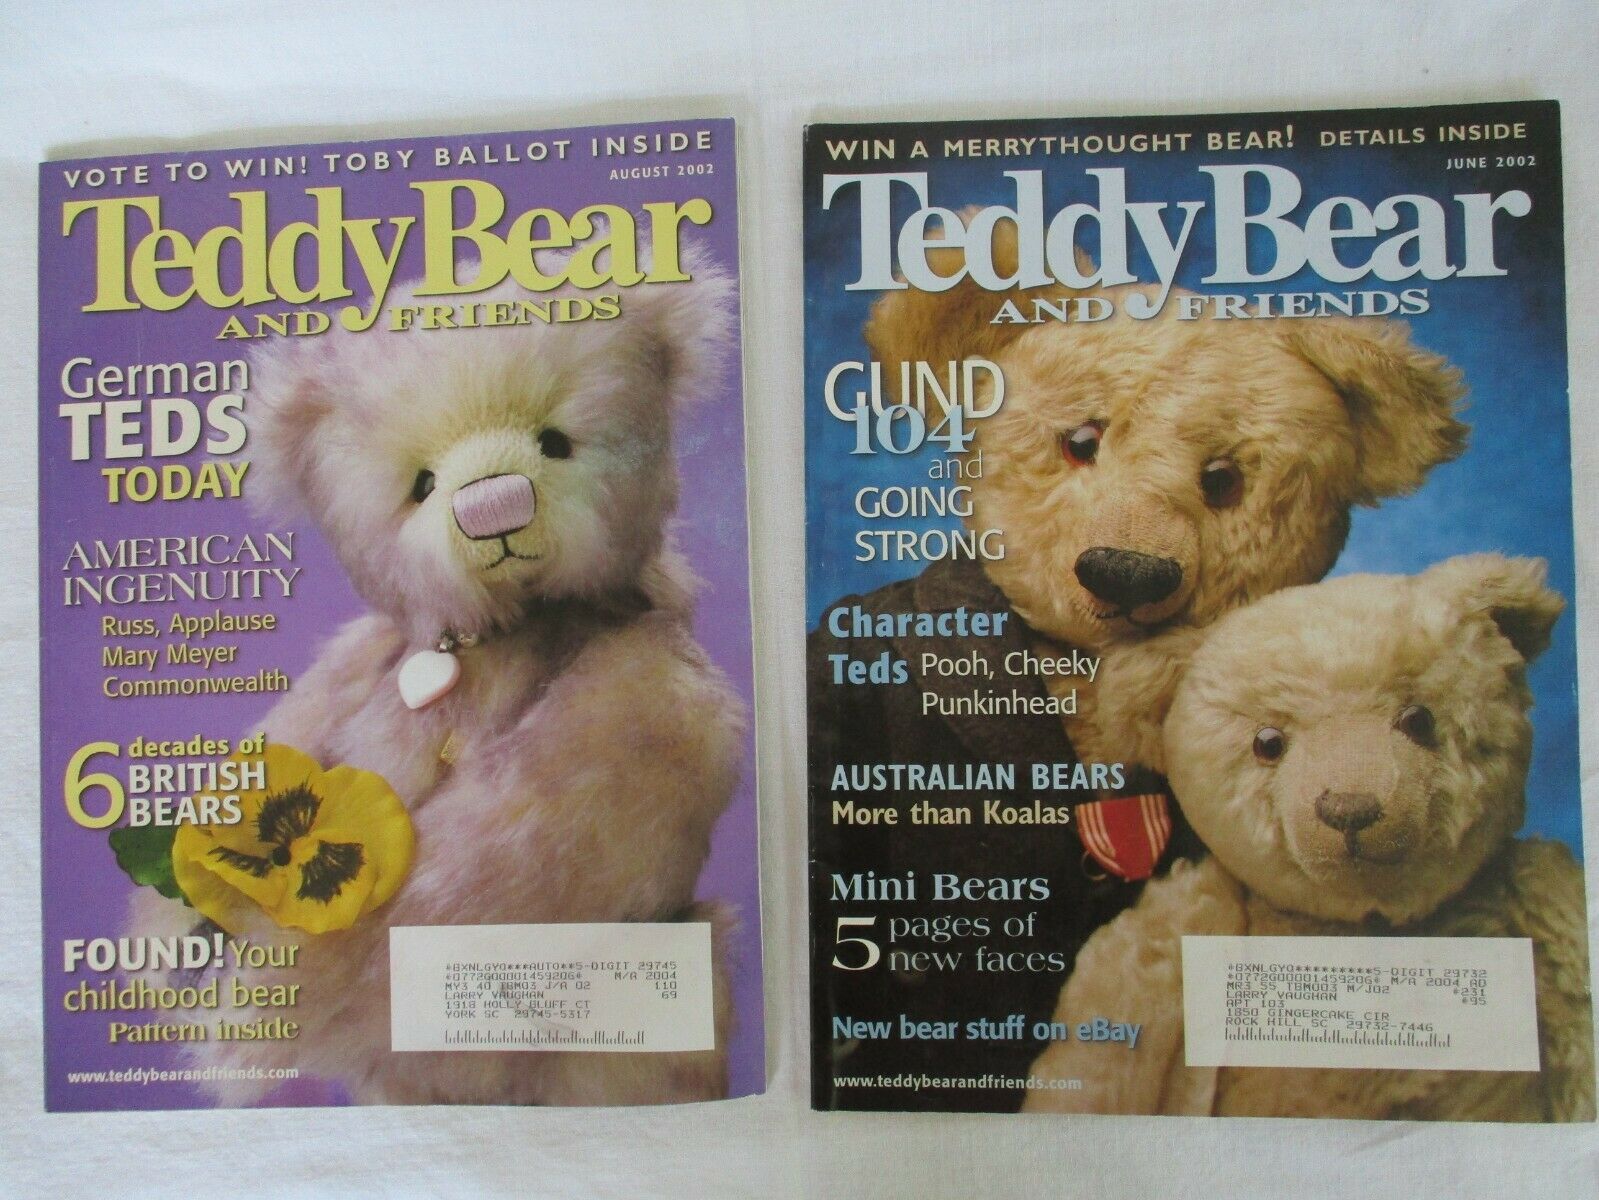 2 Teddy Bear And Friends Magazine Back Issues June And August 2002 Pooh, Cheeky